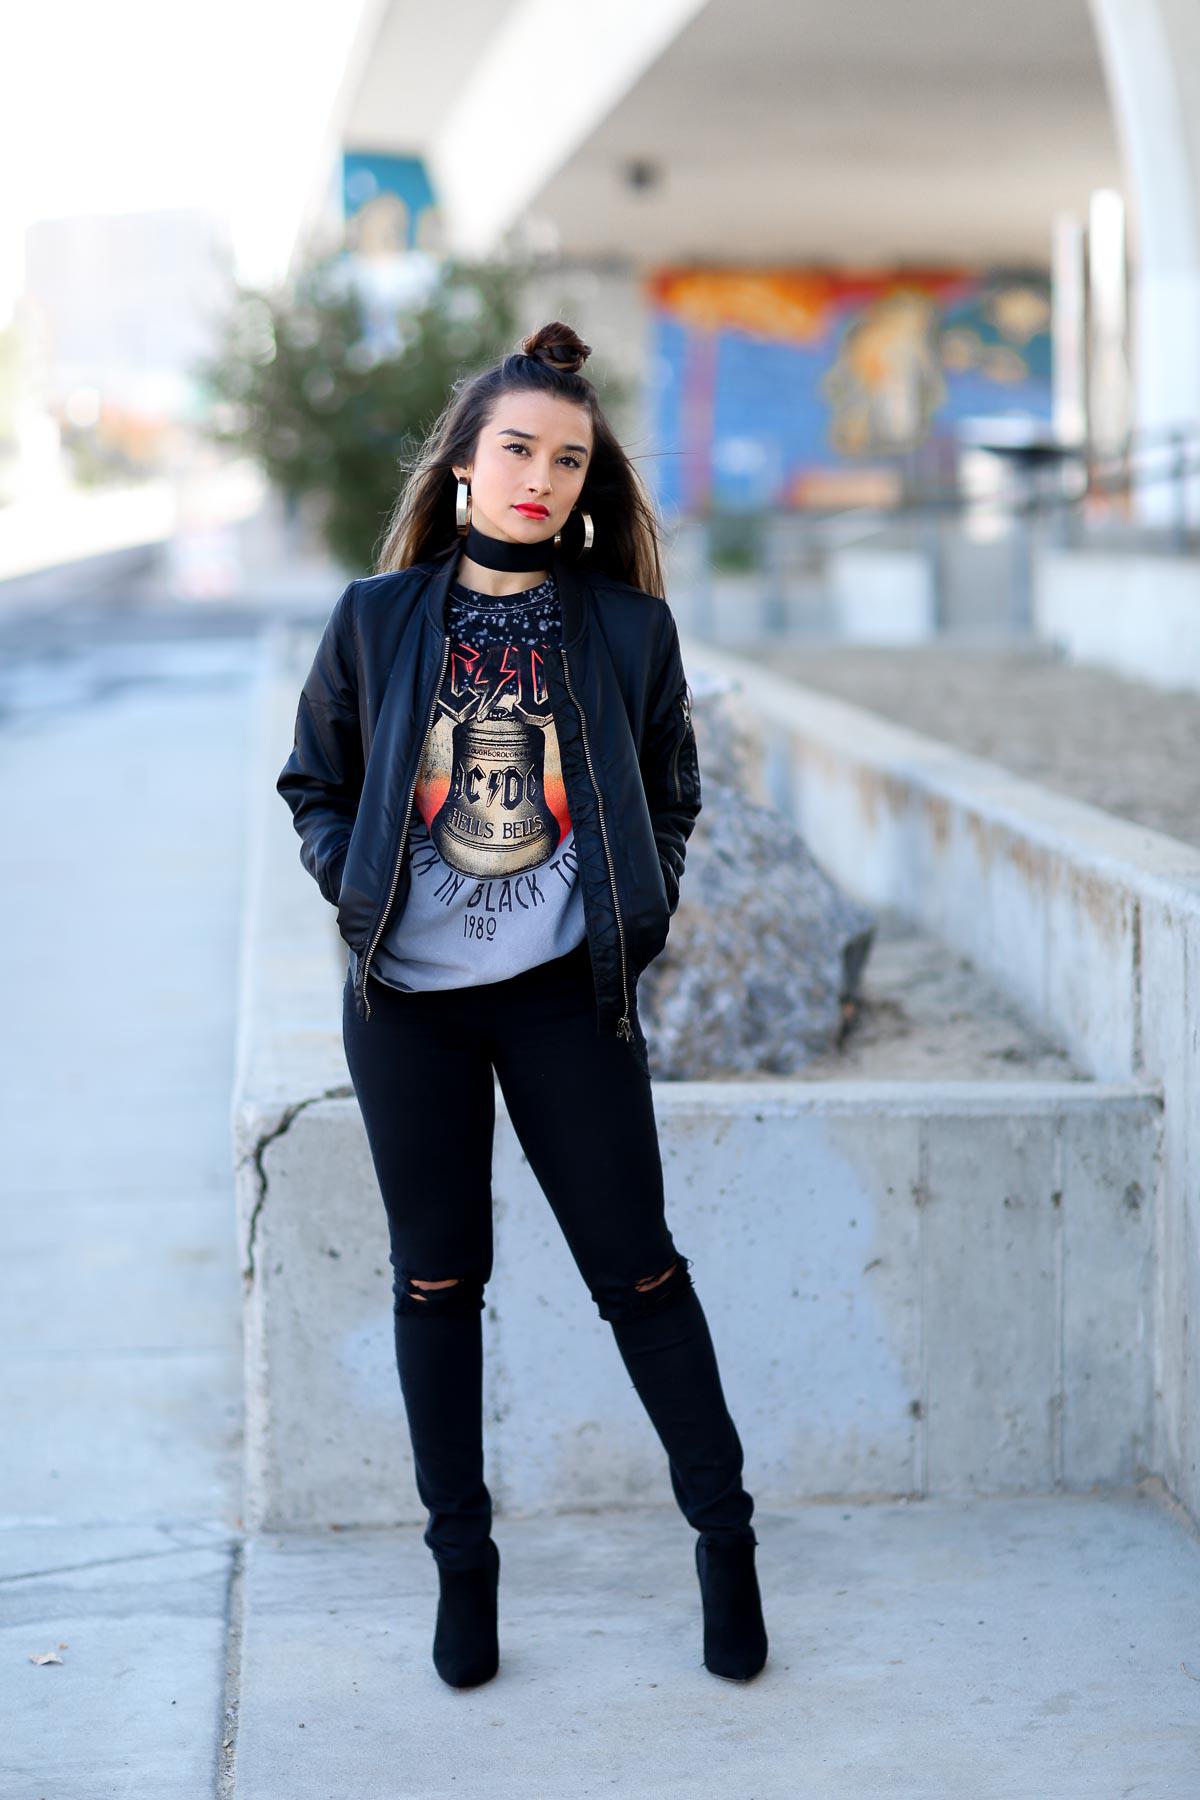 stiletto-confessions-forever-21-graphic-acdc-tee-shirt-31